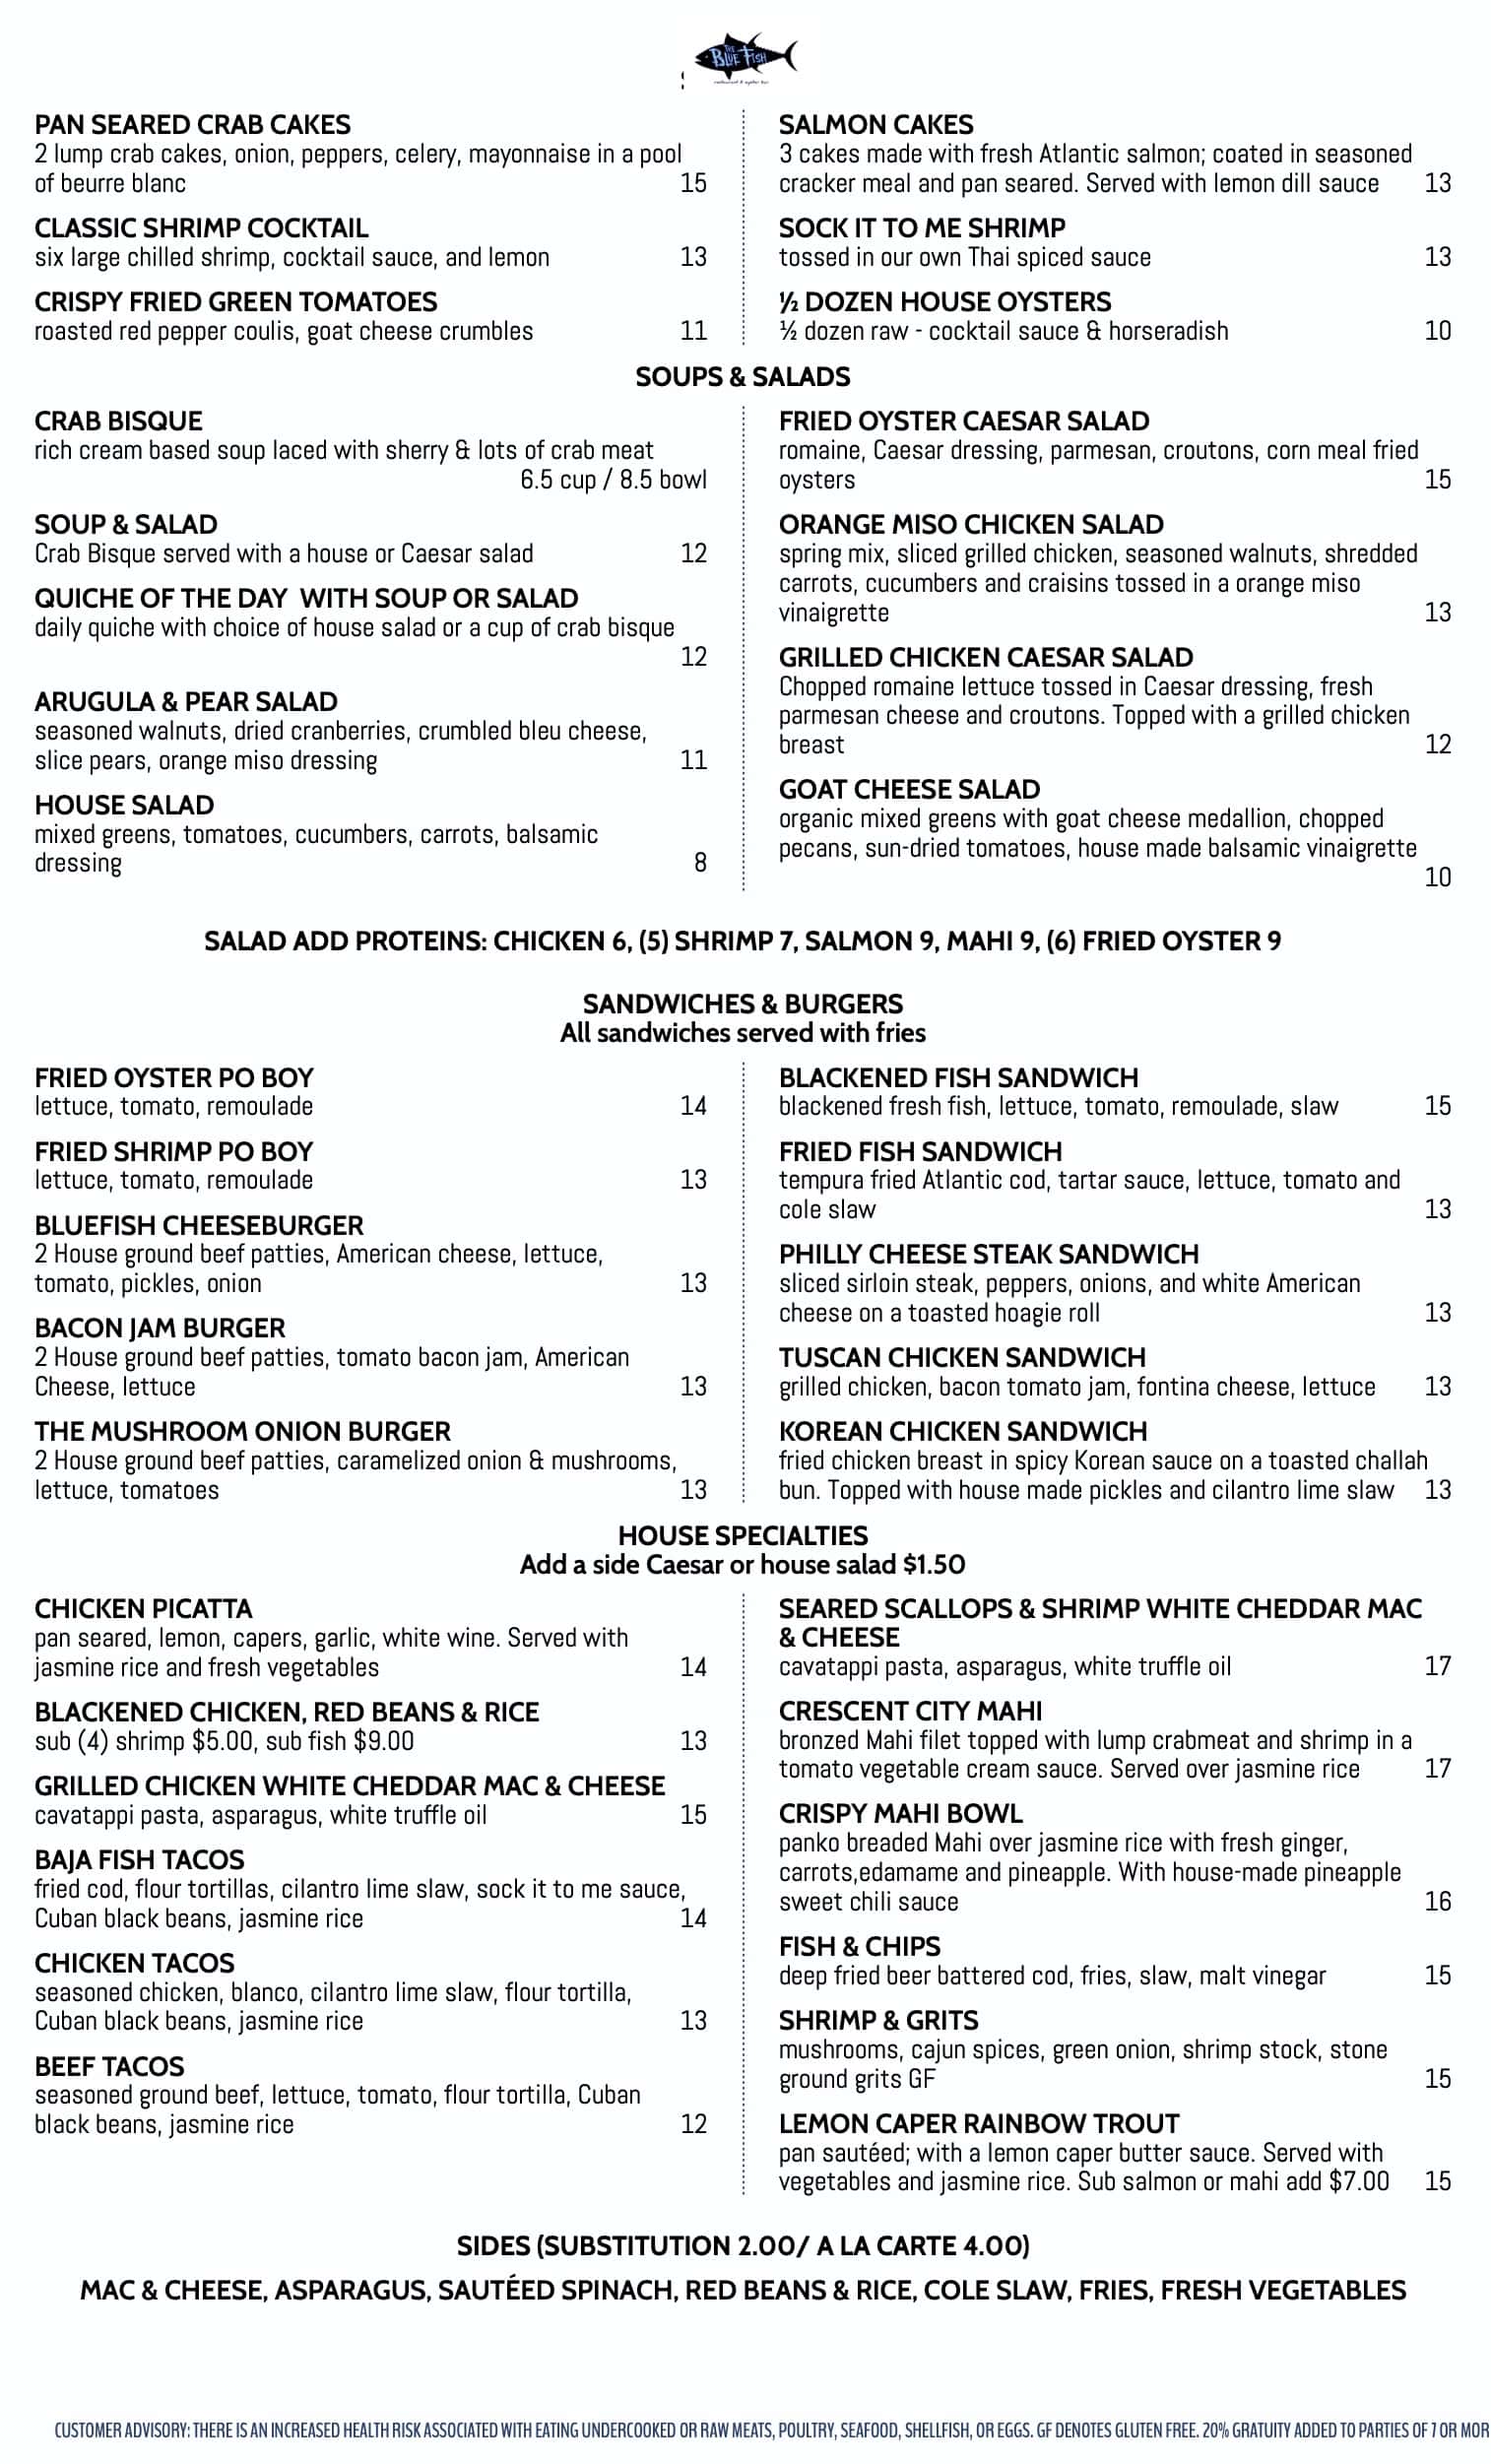 The Blue Fish Restaurant and Oyster Bar Jacksonville Lunch Menu